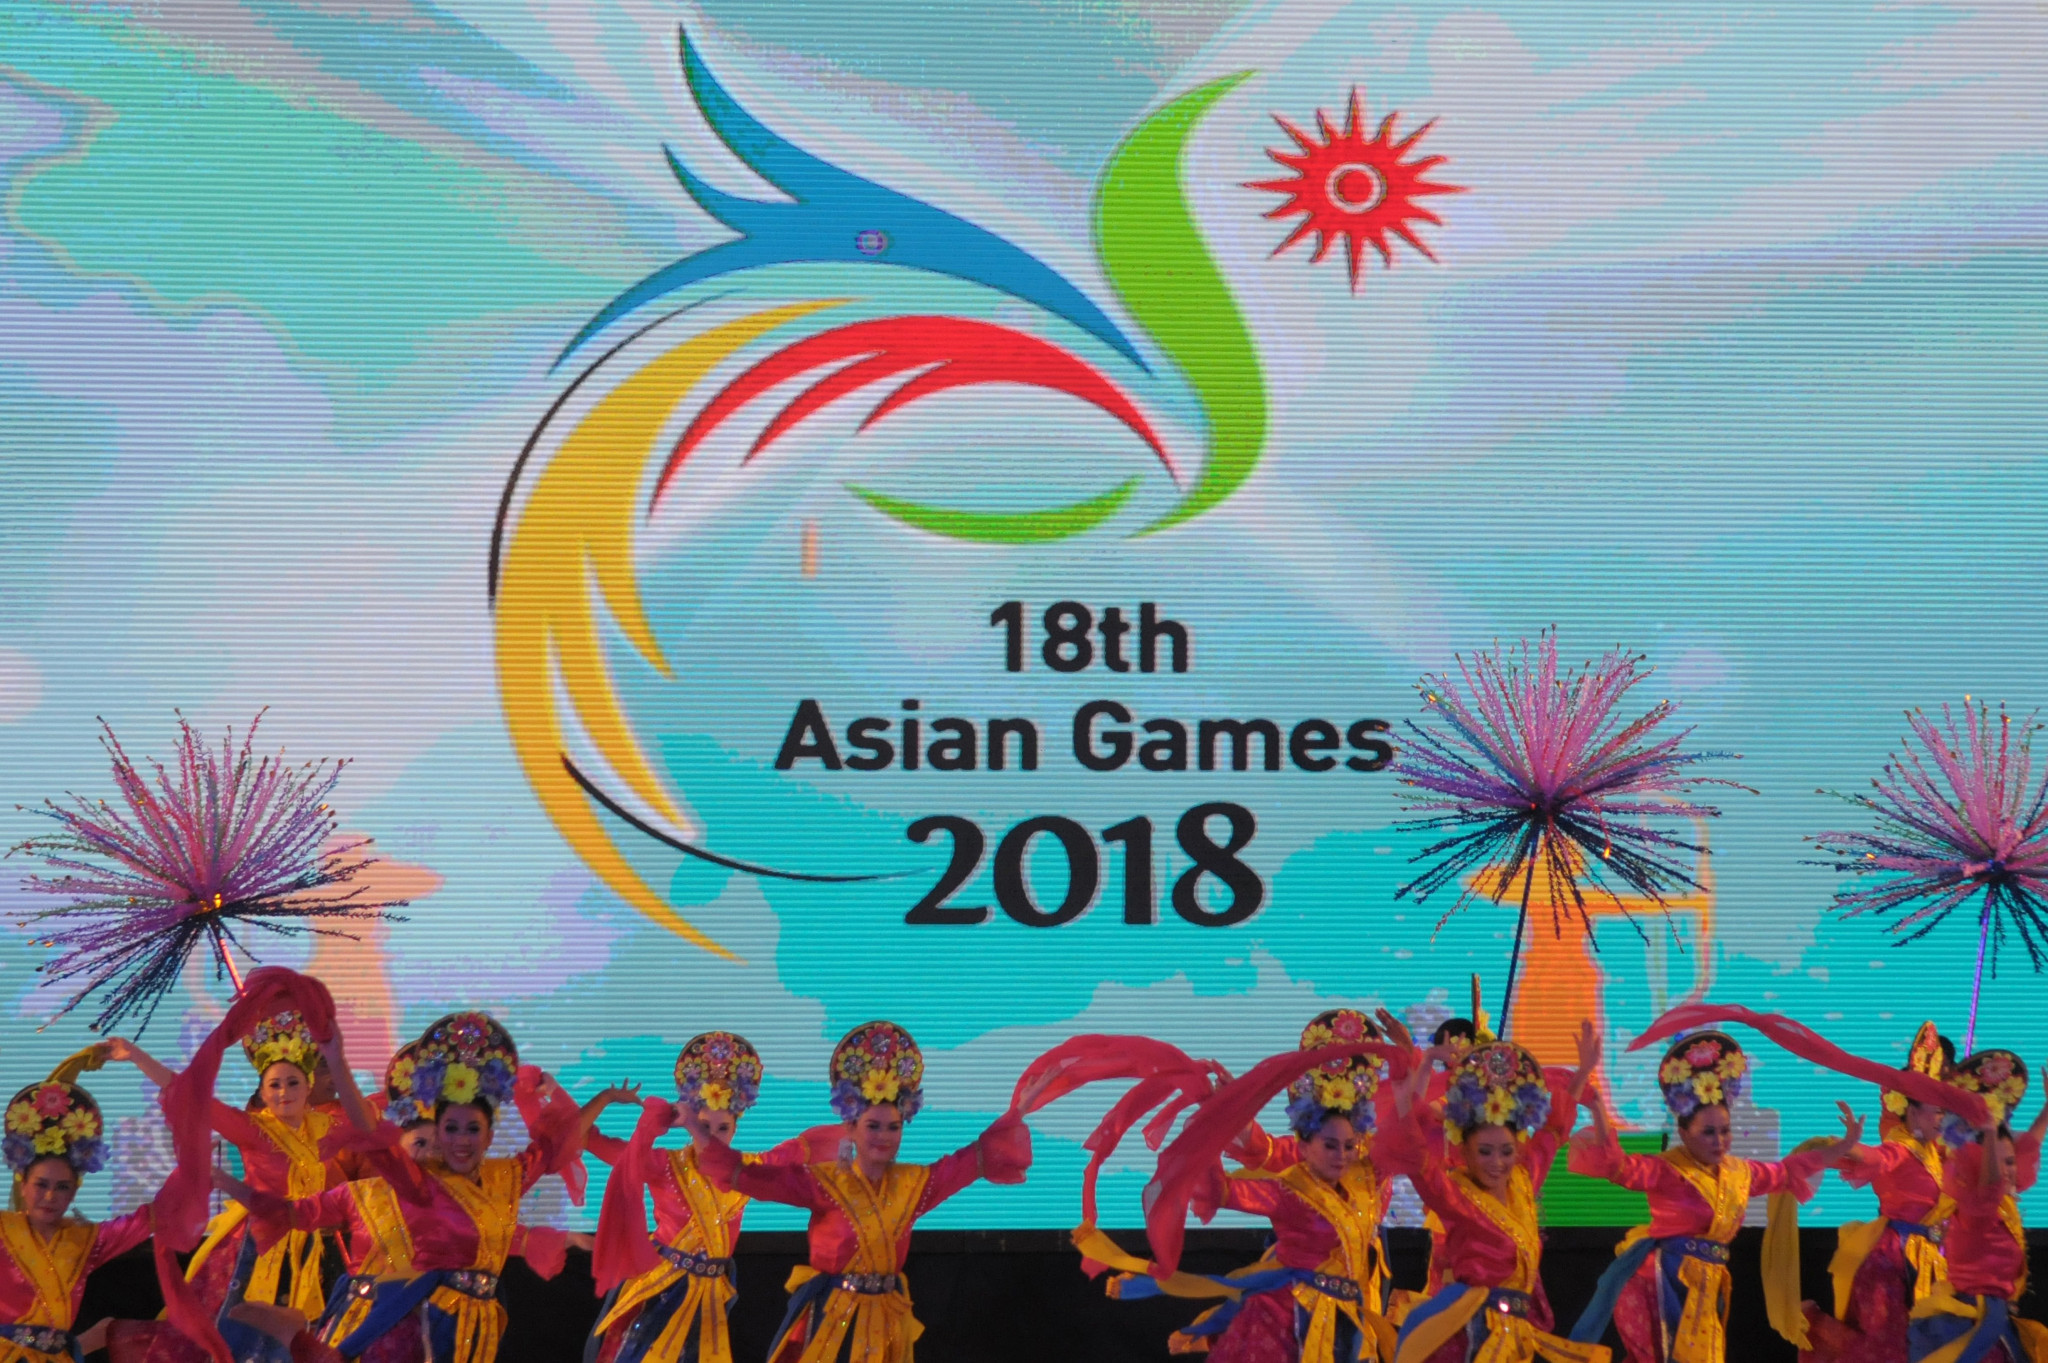 Esports featured at the Jakarta 2018 Asian Games as a demonstration event ©Getty Images